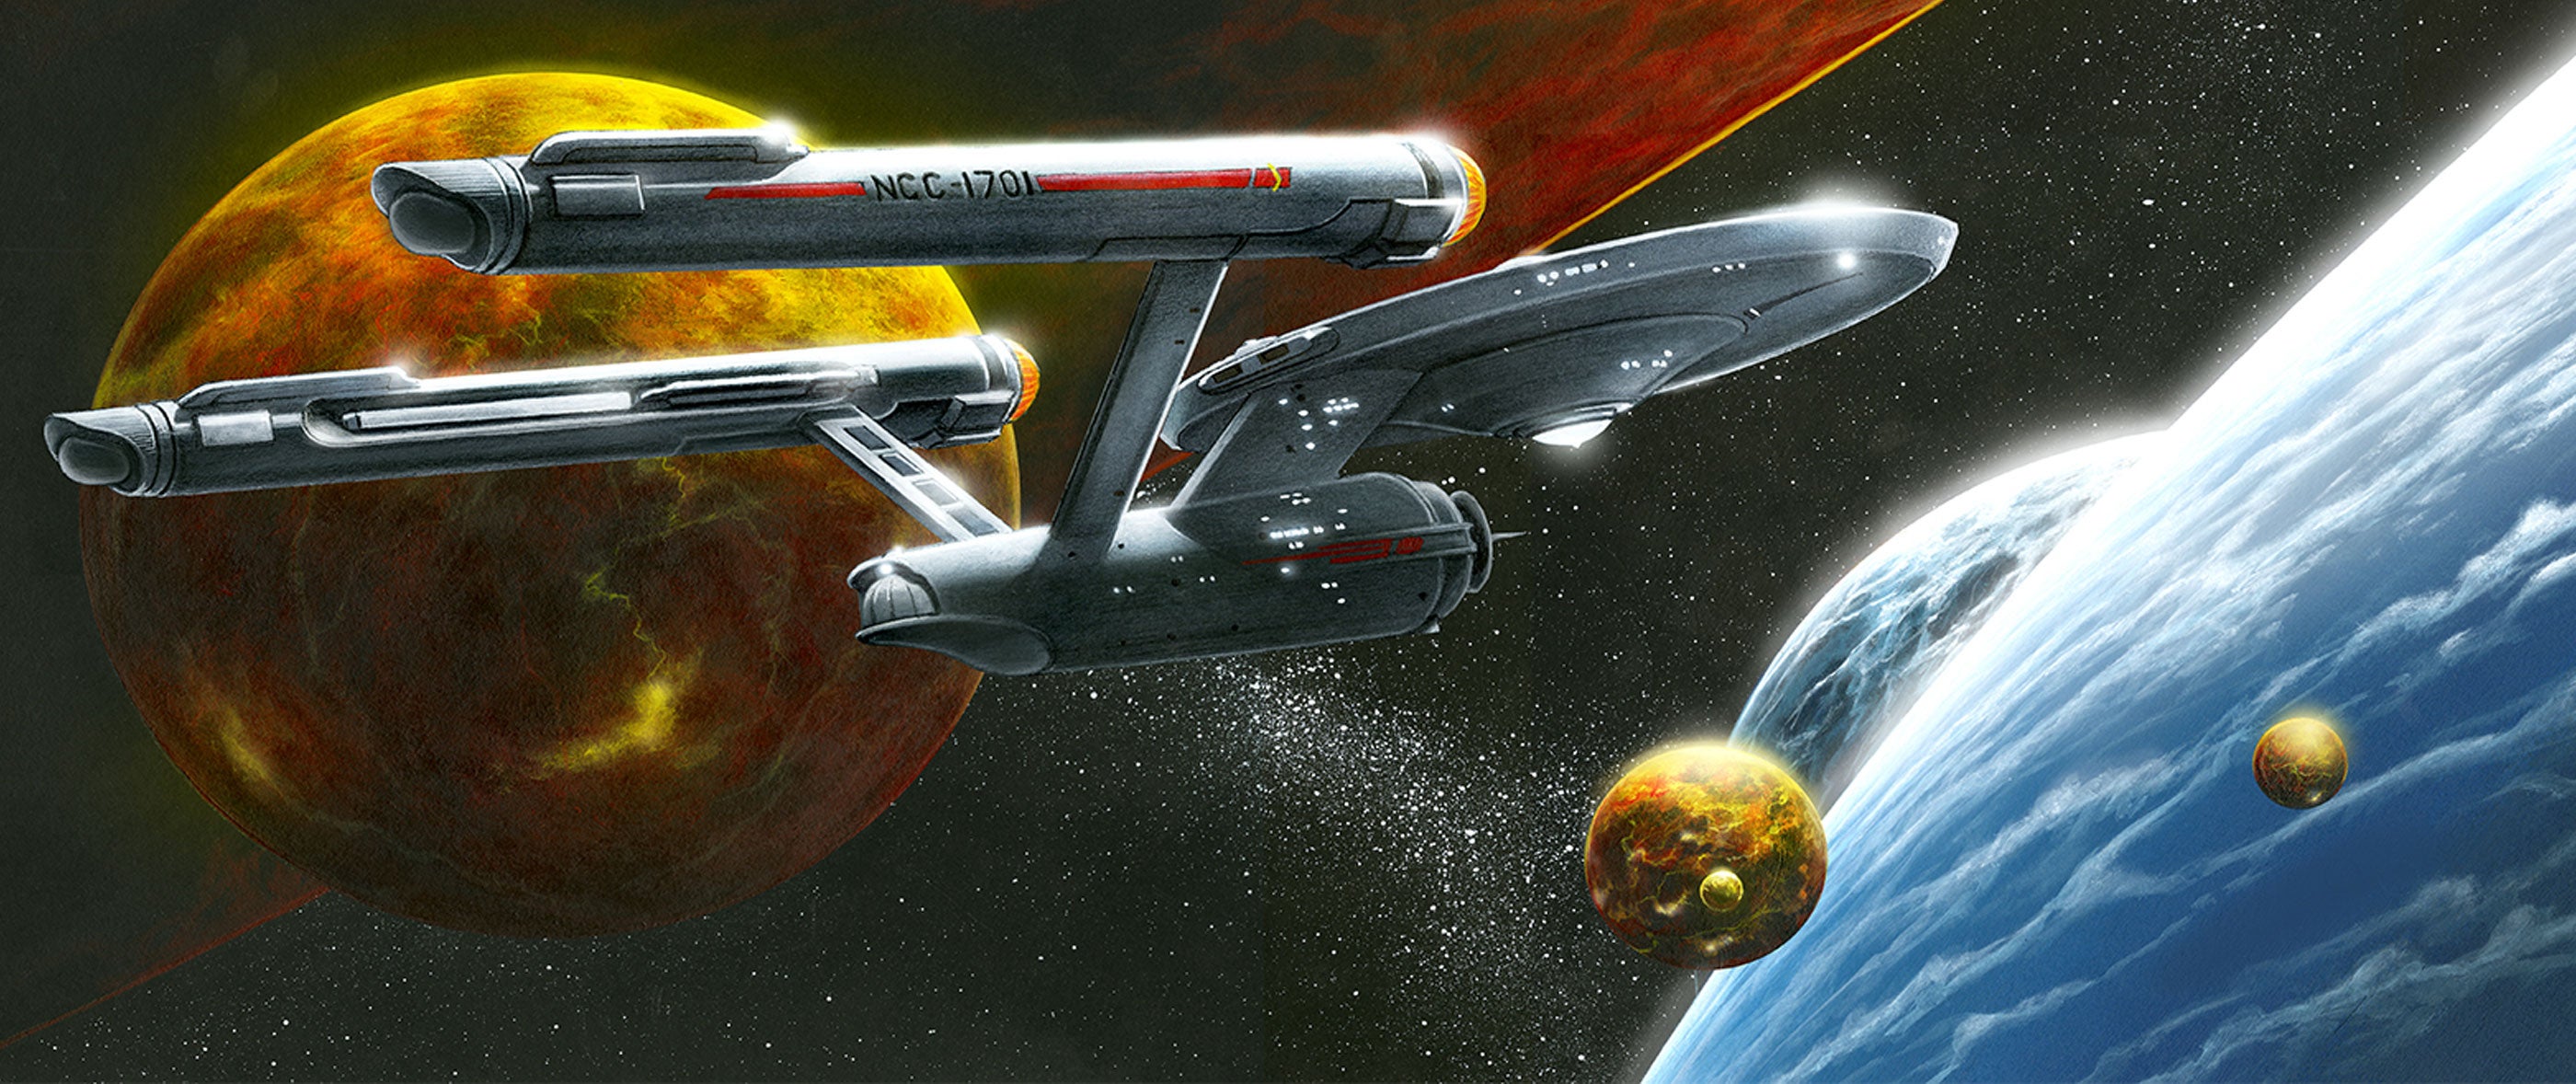 STAR TREK STRANGE NEW WORLDS Sets a Course for OldSchool Exploration and  Adventure  SPOILERFREE Review  TrekCorecom